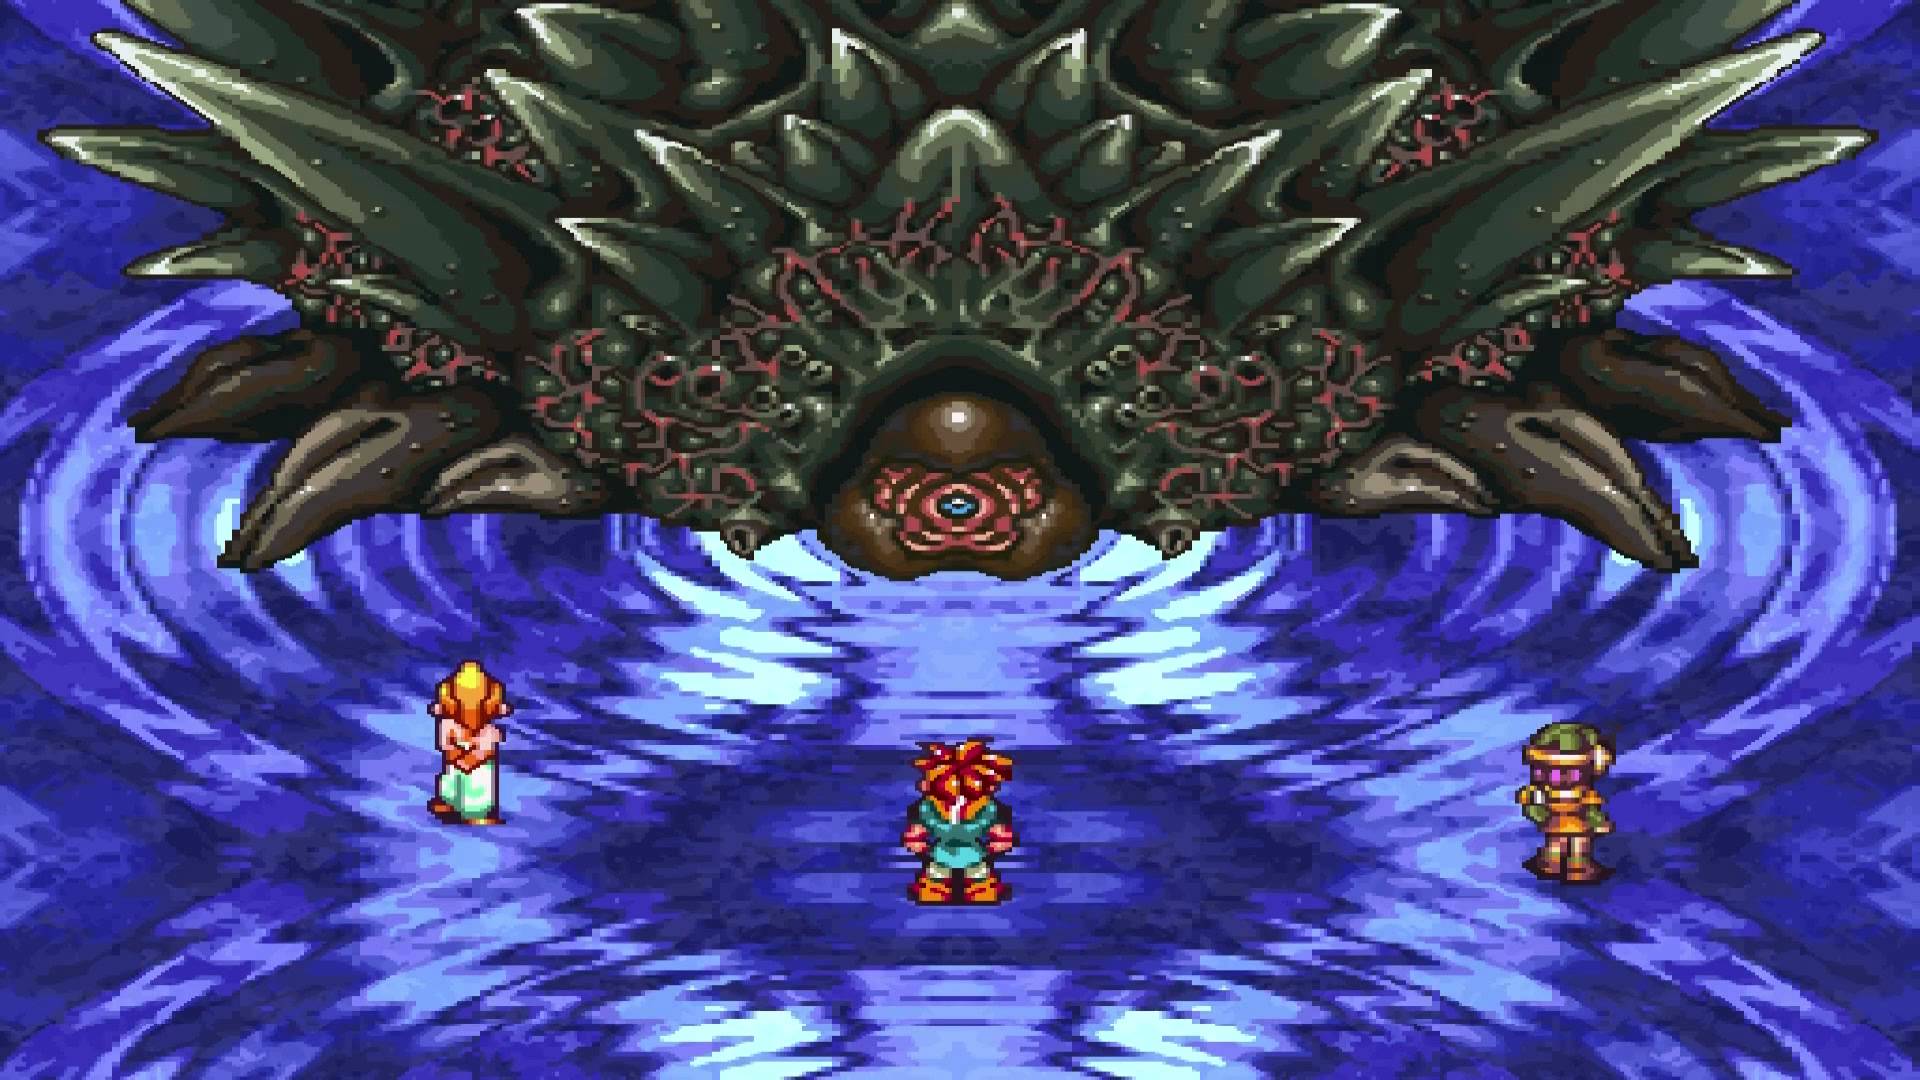 <strong><u>Crono Dies</u></strong>
</br>
</br>
<em>Chrono Trigger</em> for the SNES is one of the best games of all time, and Crono is one of the most unforgettable protagonists.
</br>
</br>
That’s why it was so shocking to see him get killed partway through the game by the villainous Lavos.
</br>
</br>
Even more shocking, you can choose whether to try to save him or finish the game without him.
